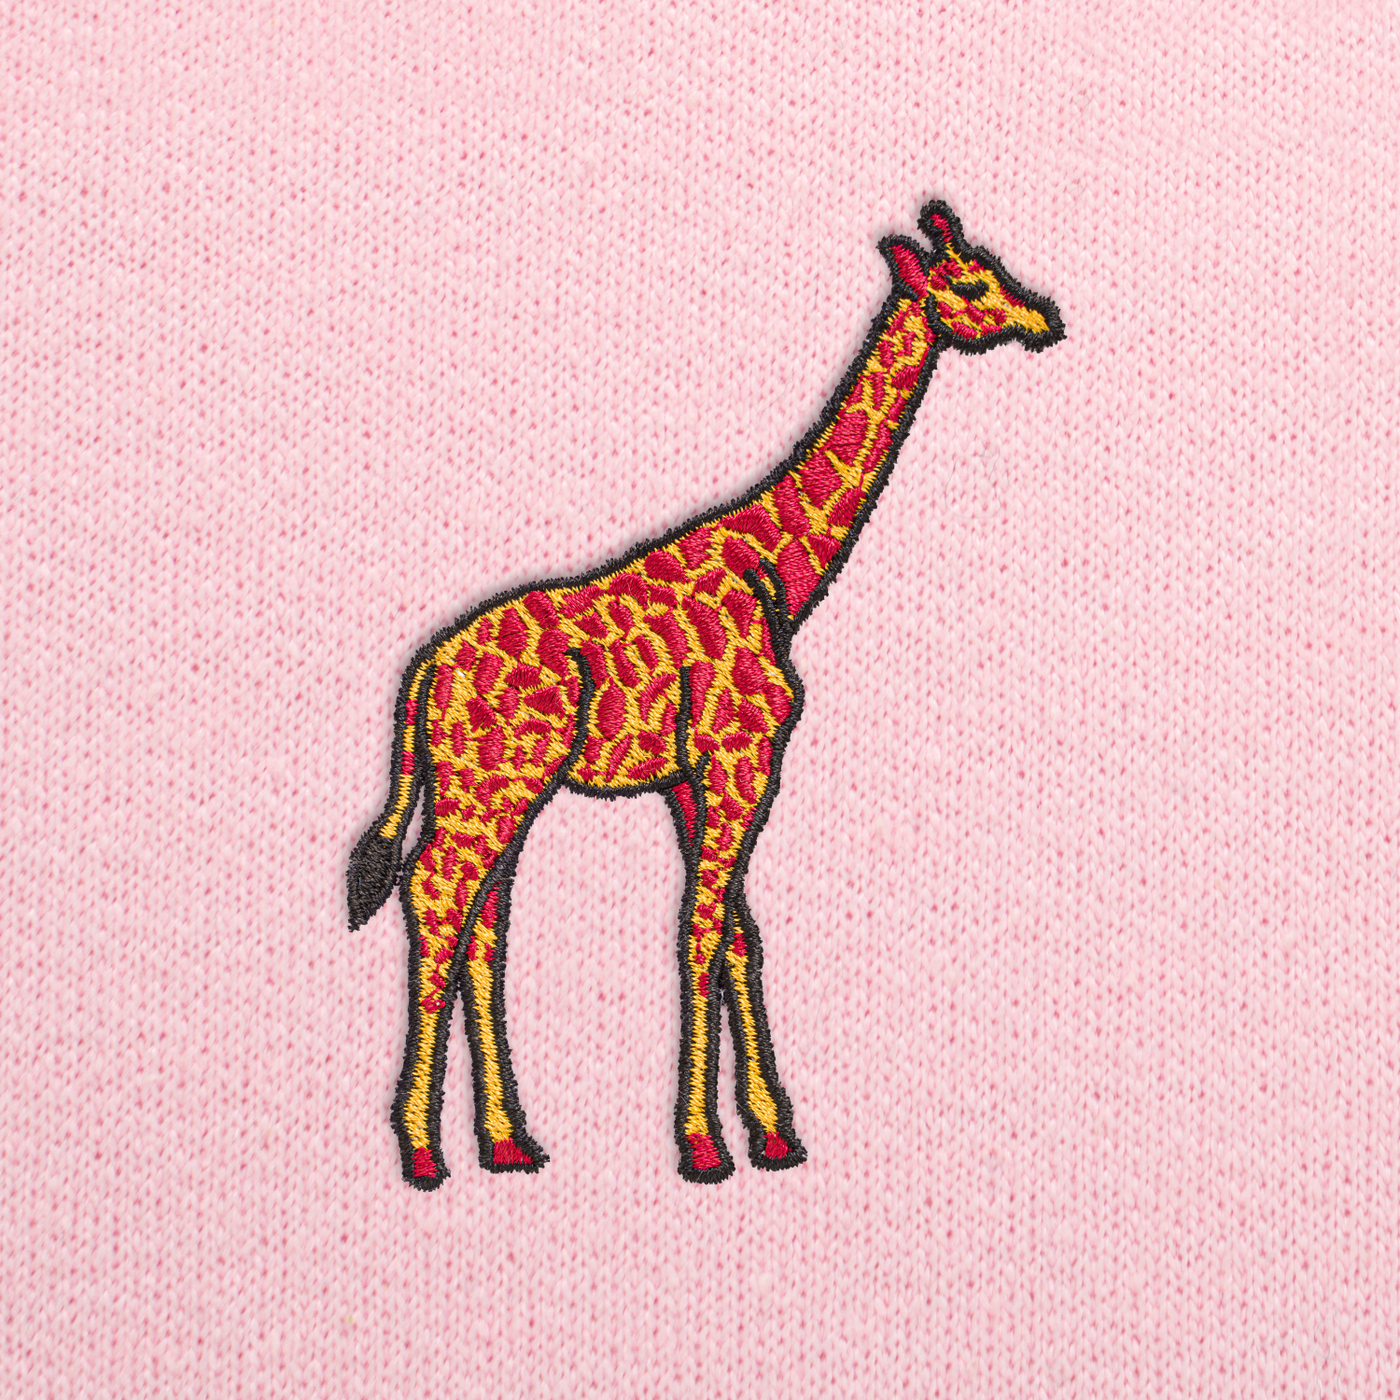 Bobby's Planet Women's Embroidered Giraffe Hoodie from African Animals Collection in Light Pink Color#color_light-pink